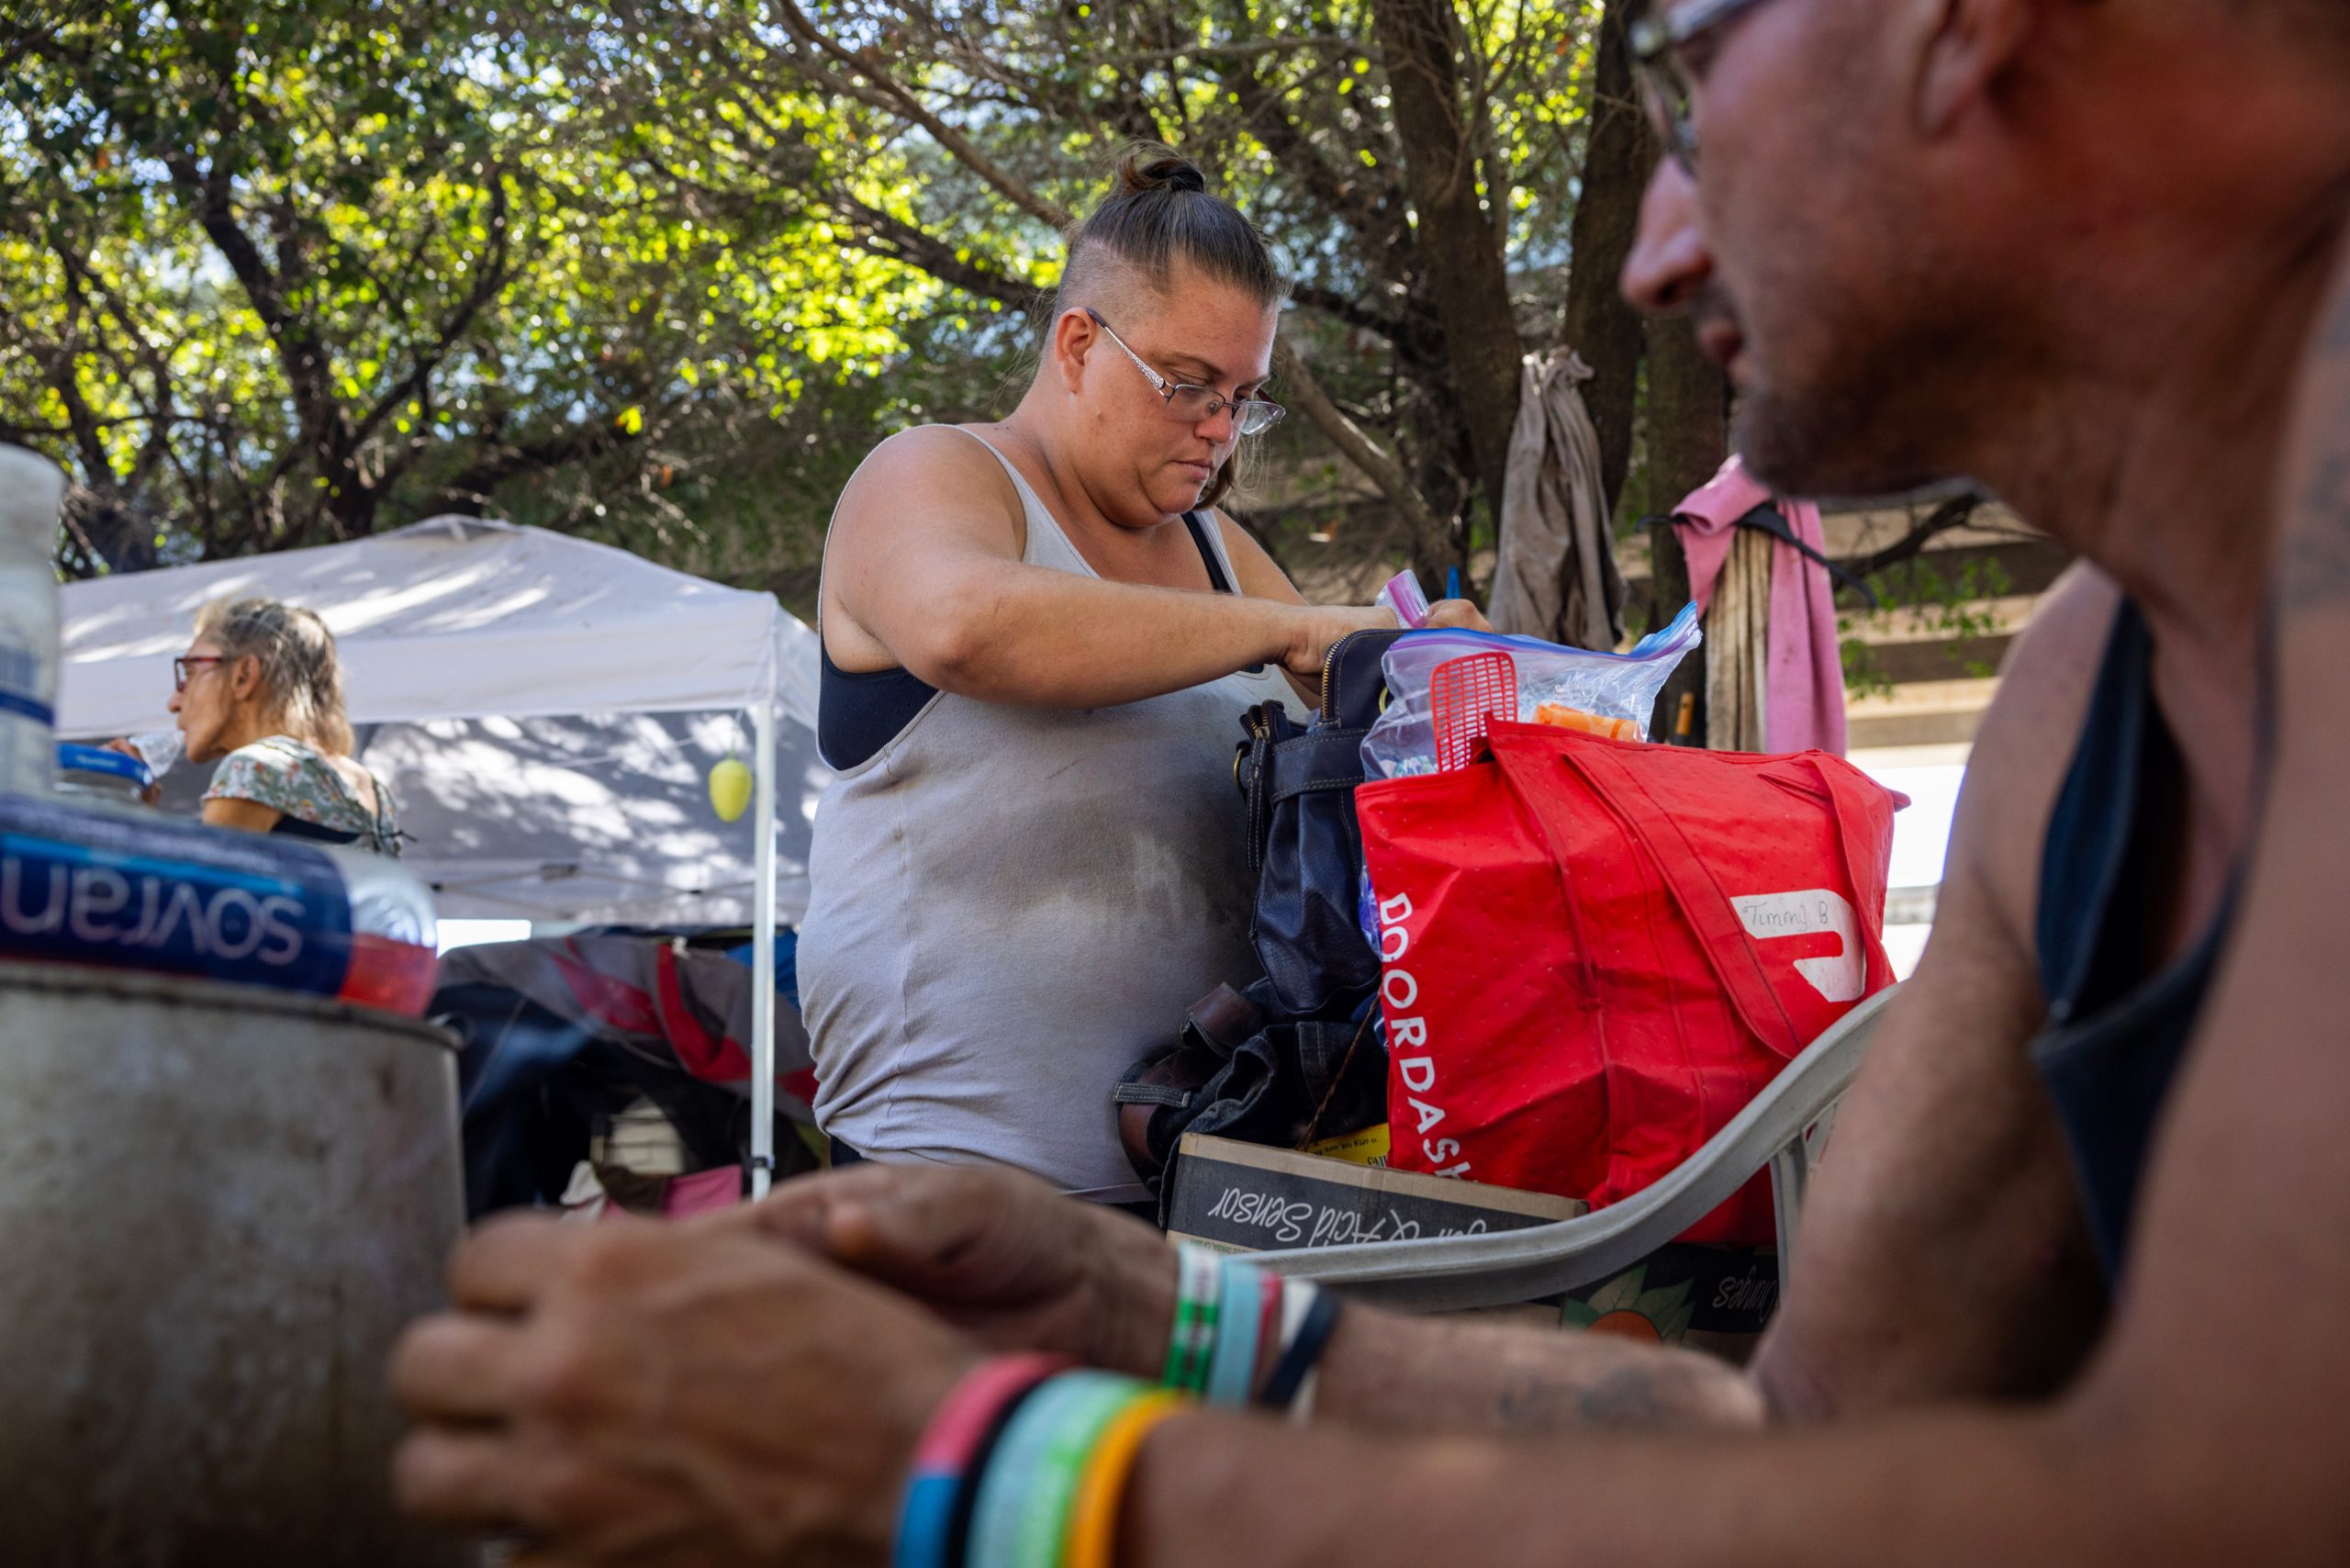 Sara Smith, at center, looks at her mail at an encampment under an overpass in Houston